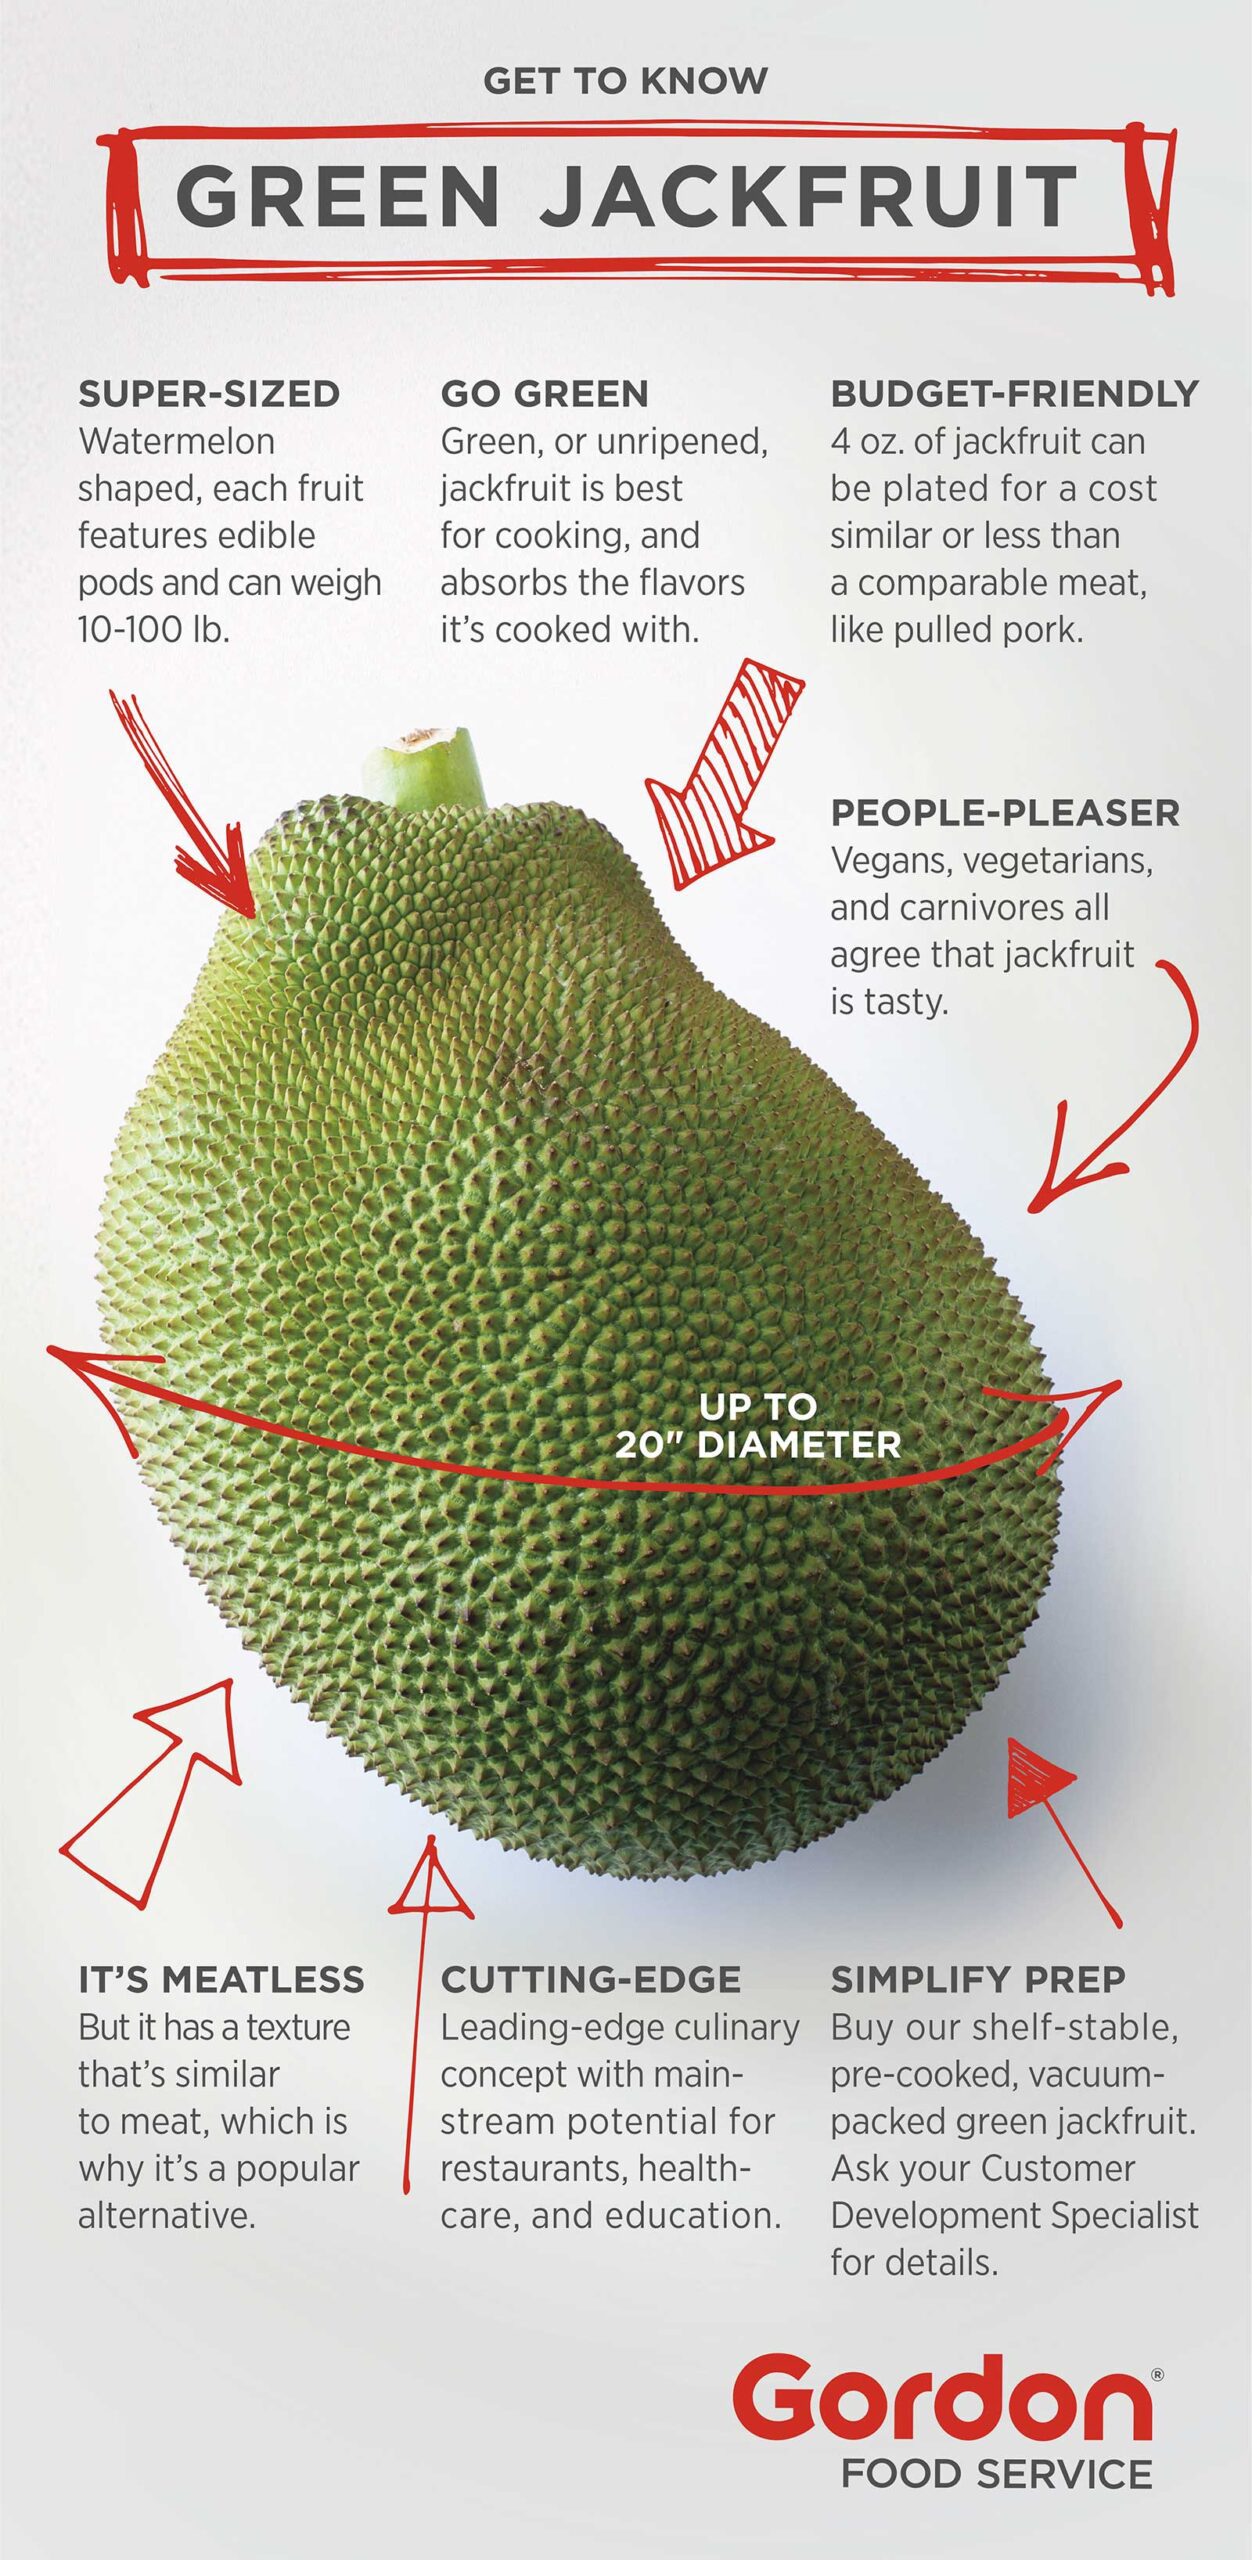 https://gfs.com/wp-content/uploads/2022/08/Get_To_Know_Jackfruit_Infographic-scaled.jpg